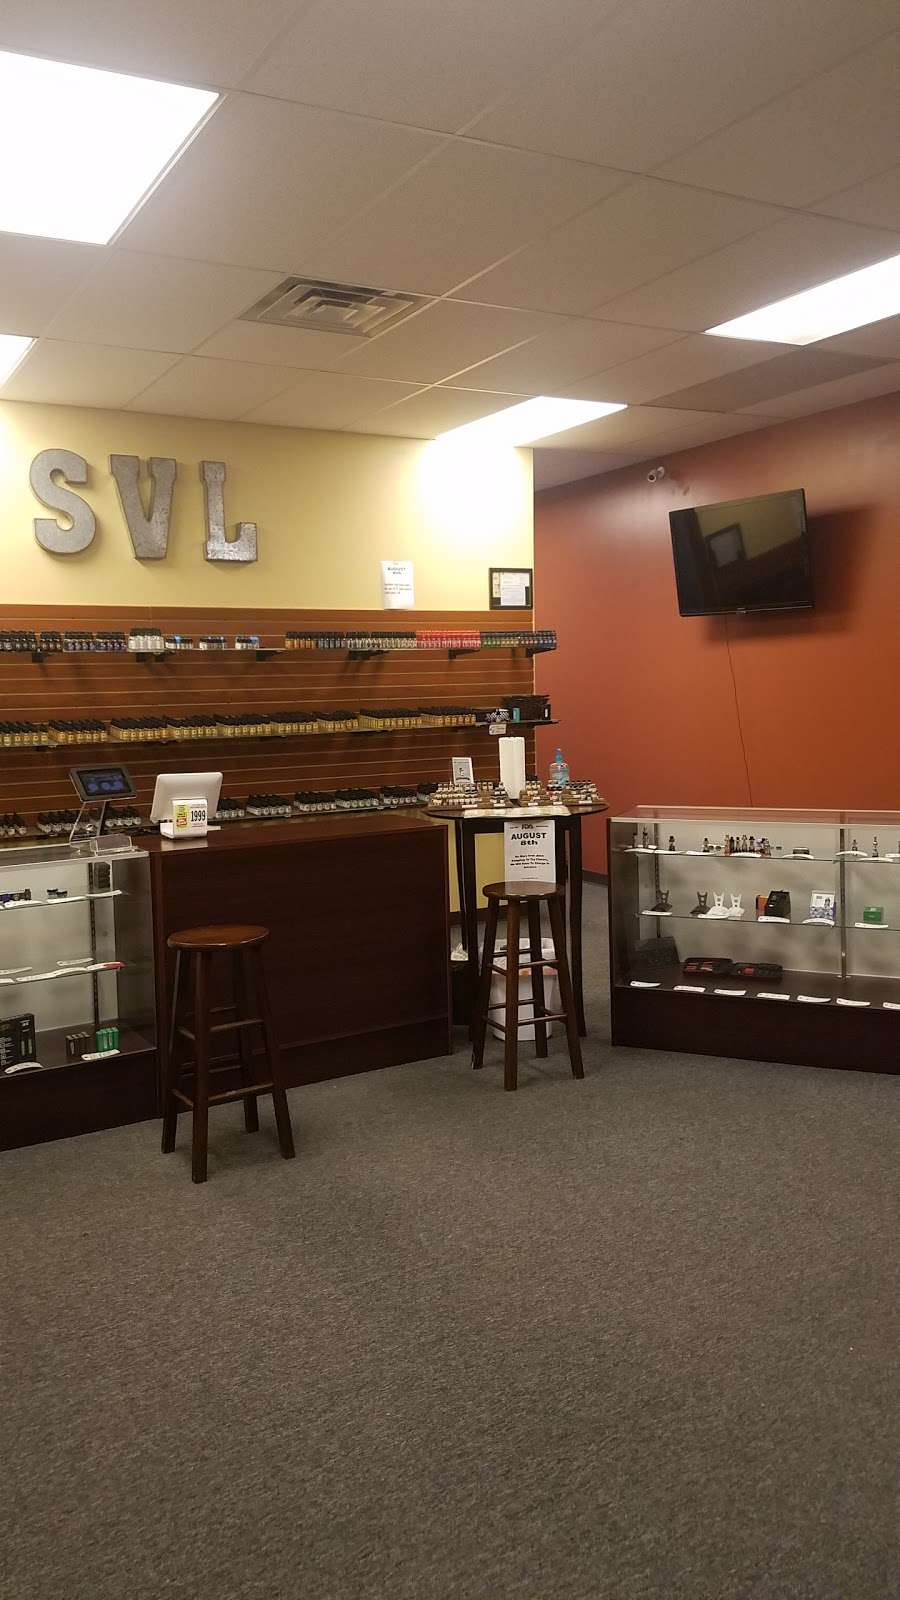 Sir Vapes-A-Lot | 2310 W Southport Rd j, Indianapolis, IN 46217, USA | Phone: (317) 497-8818